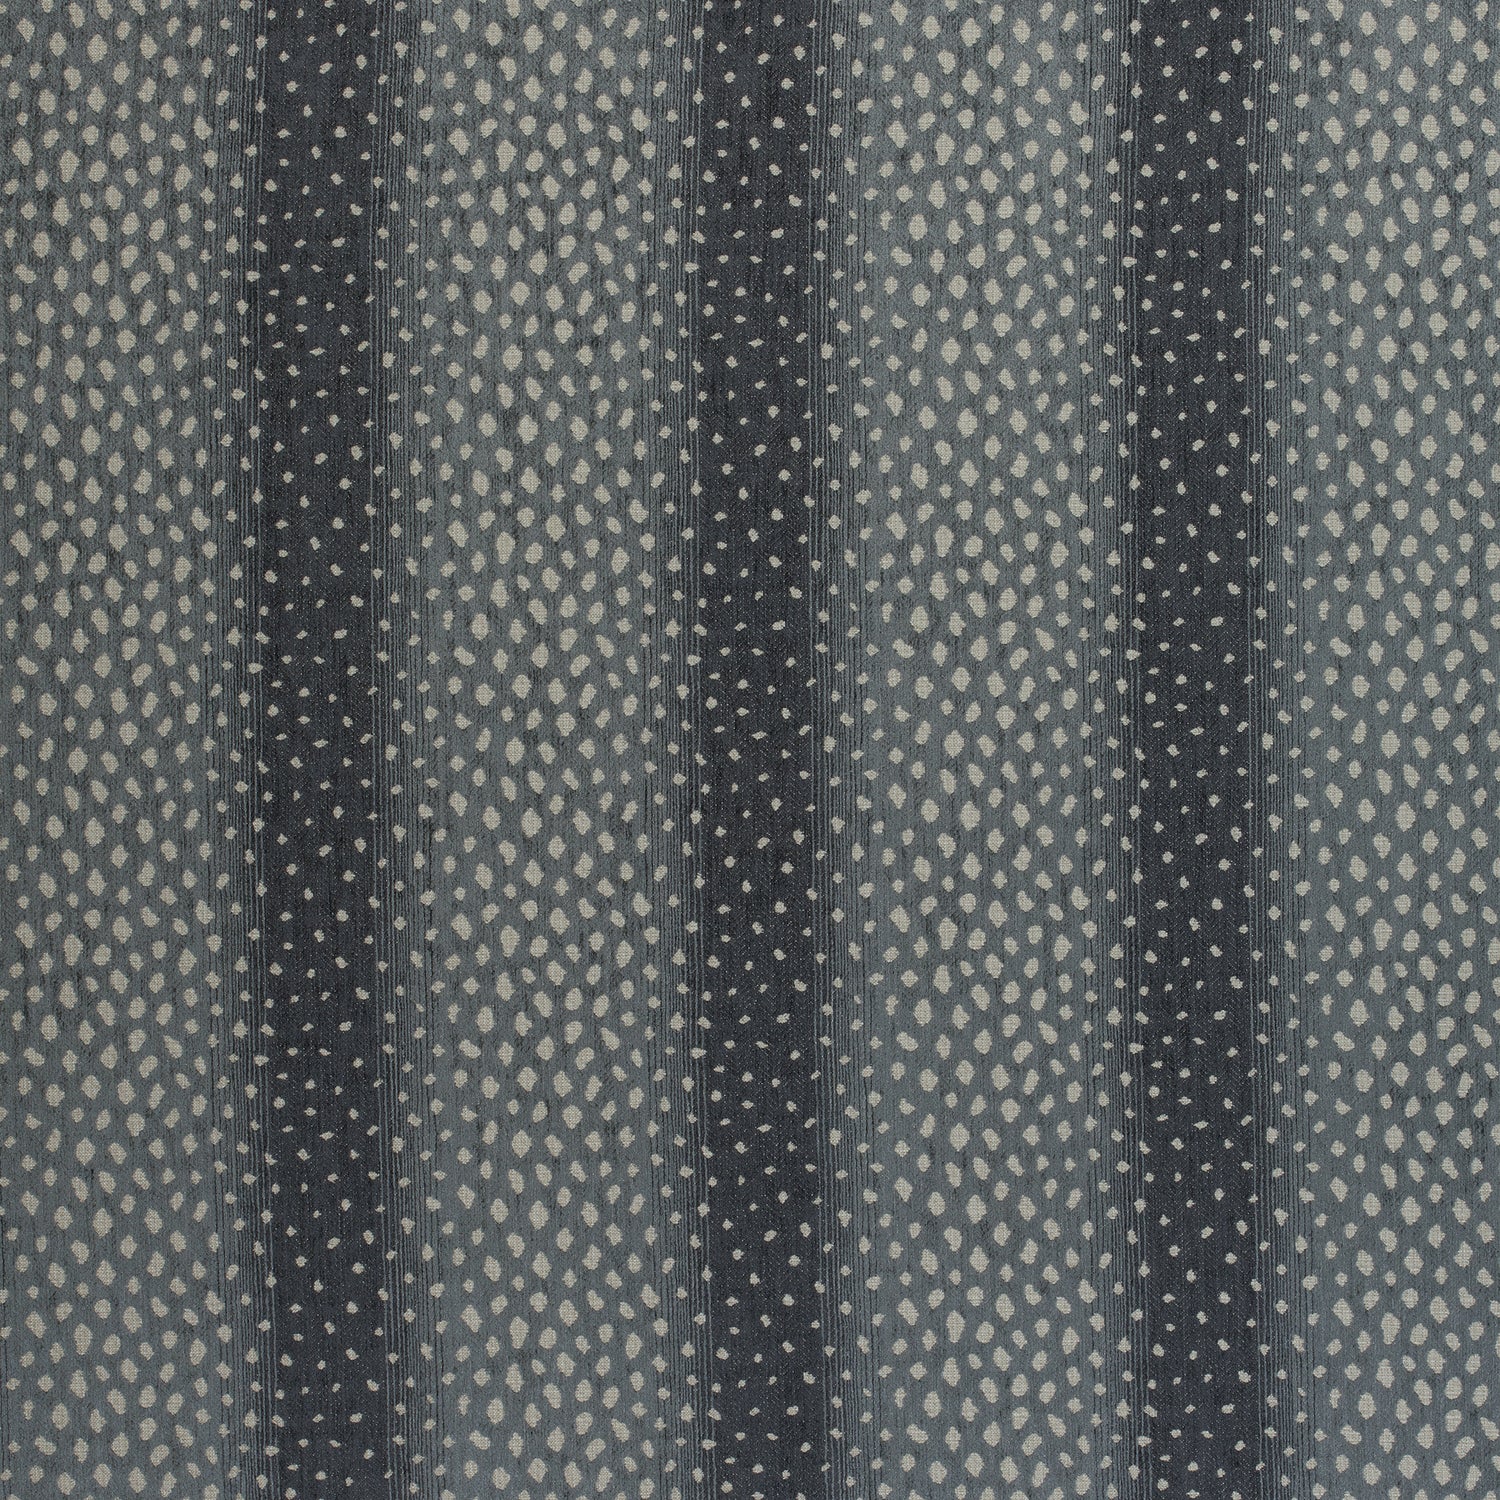 Gazelle fabric in charcoal color - pattern number W80431 - by Thibaut in the Woven Resource Vol 10 Menagerie collection